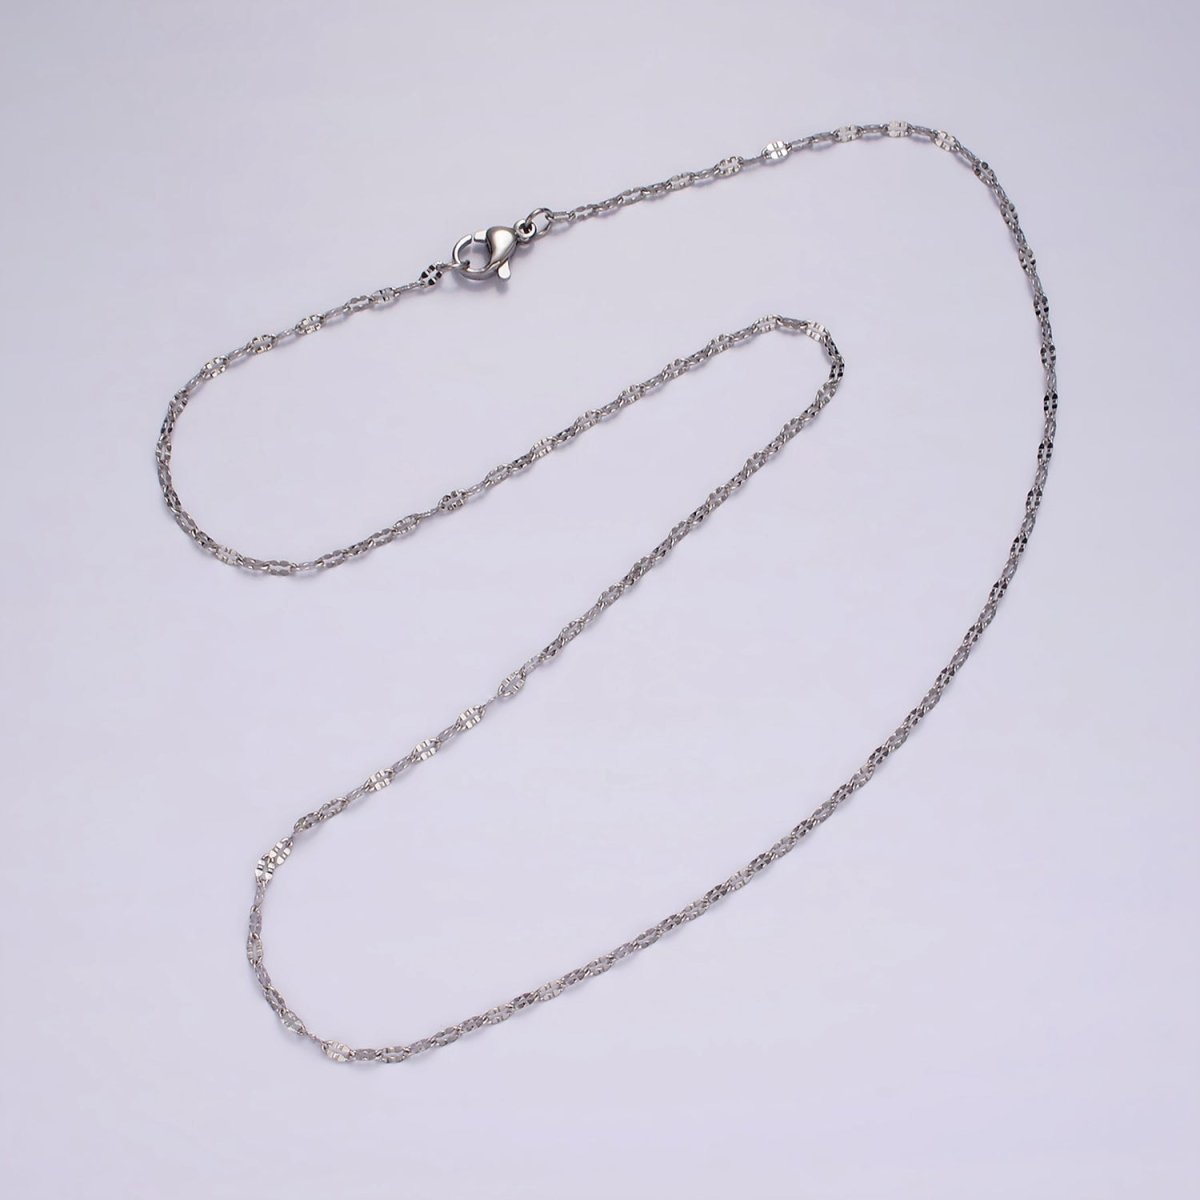 Dainty Stainless Steel Sunburst Diamond Cut Cable Chain Necklace 18 inch in Silver | WA-2392 - DLUXCA